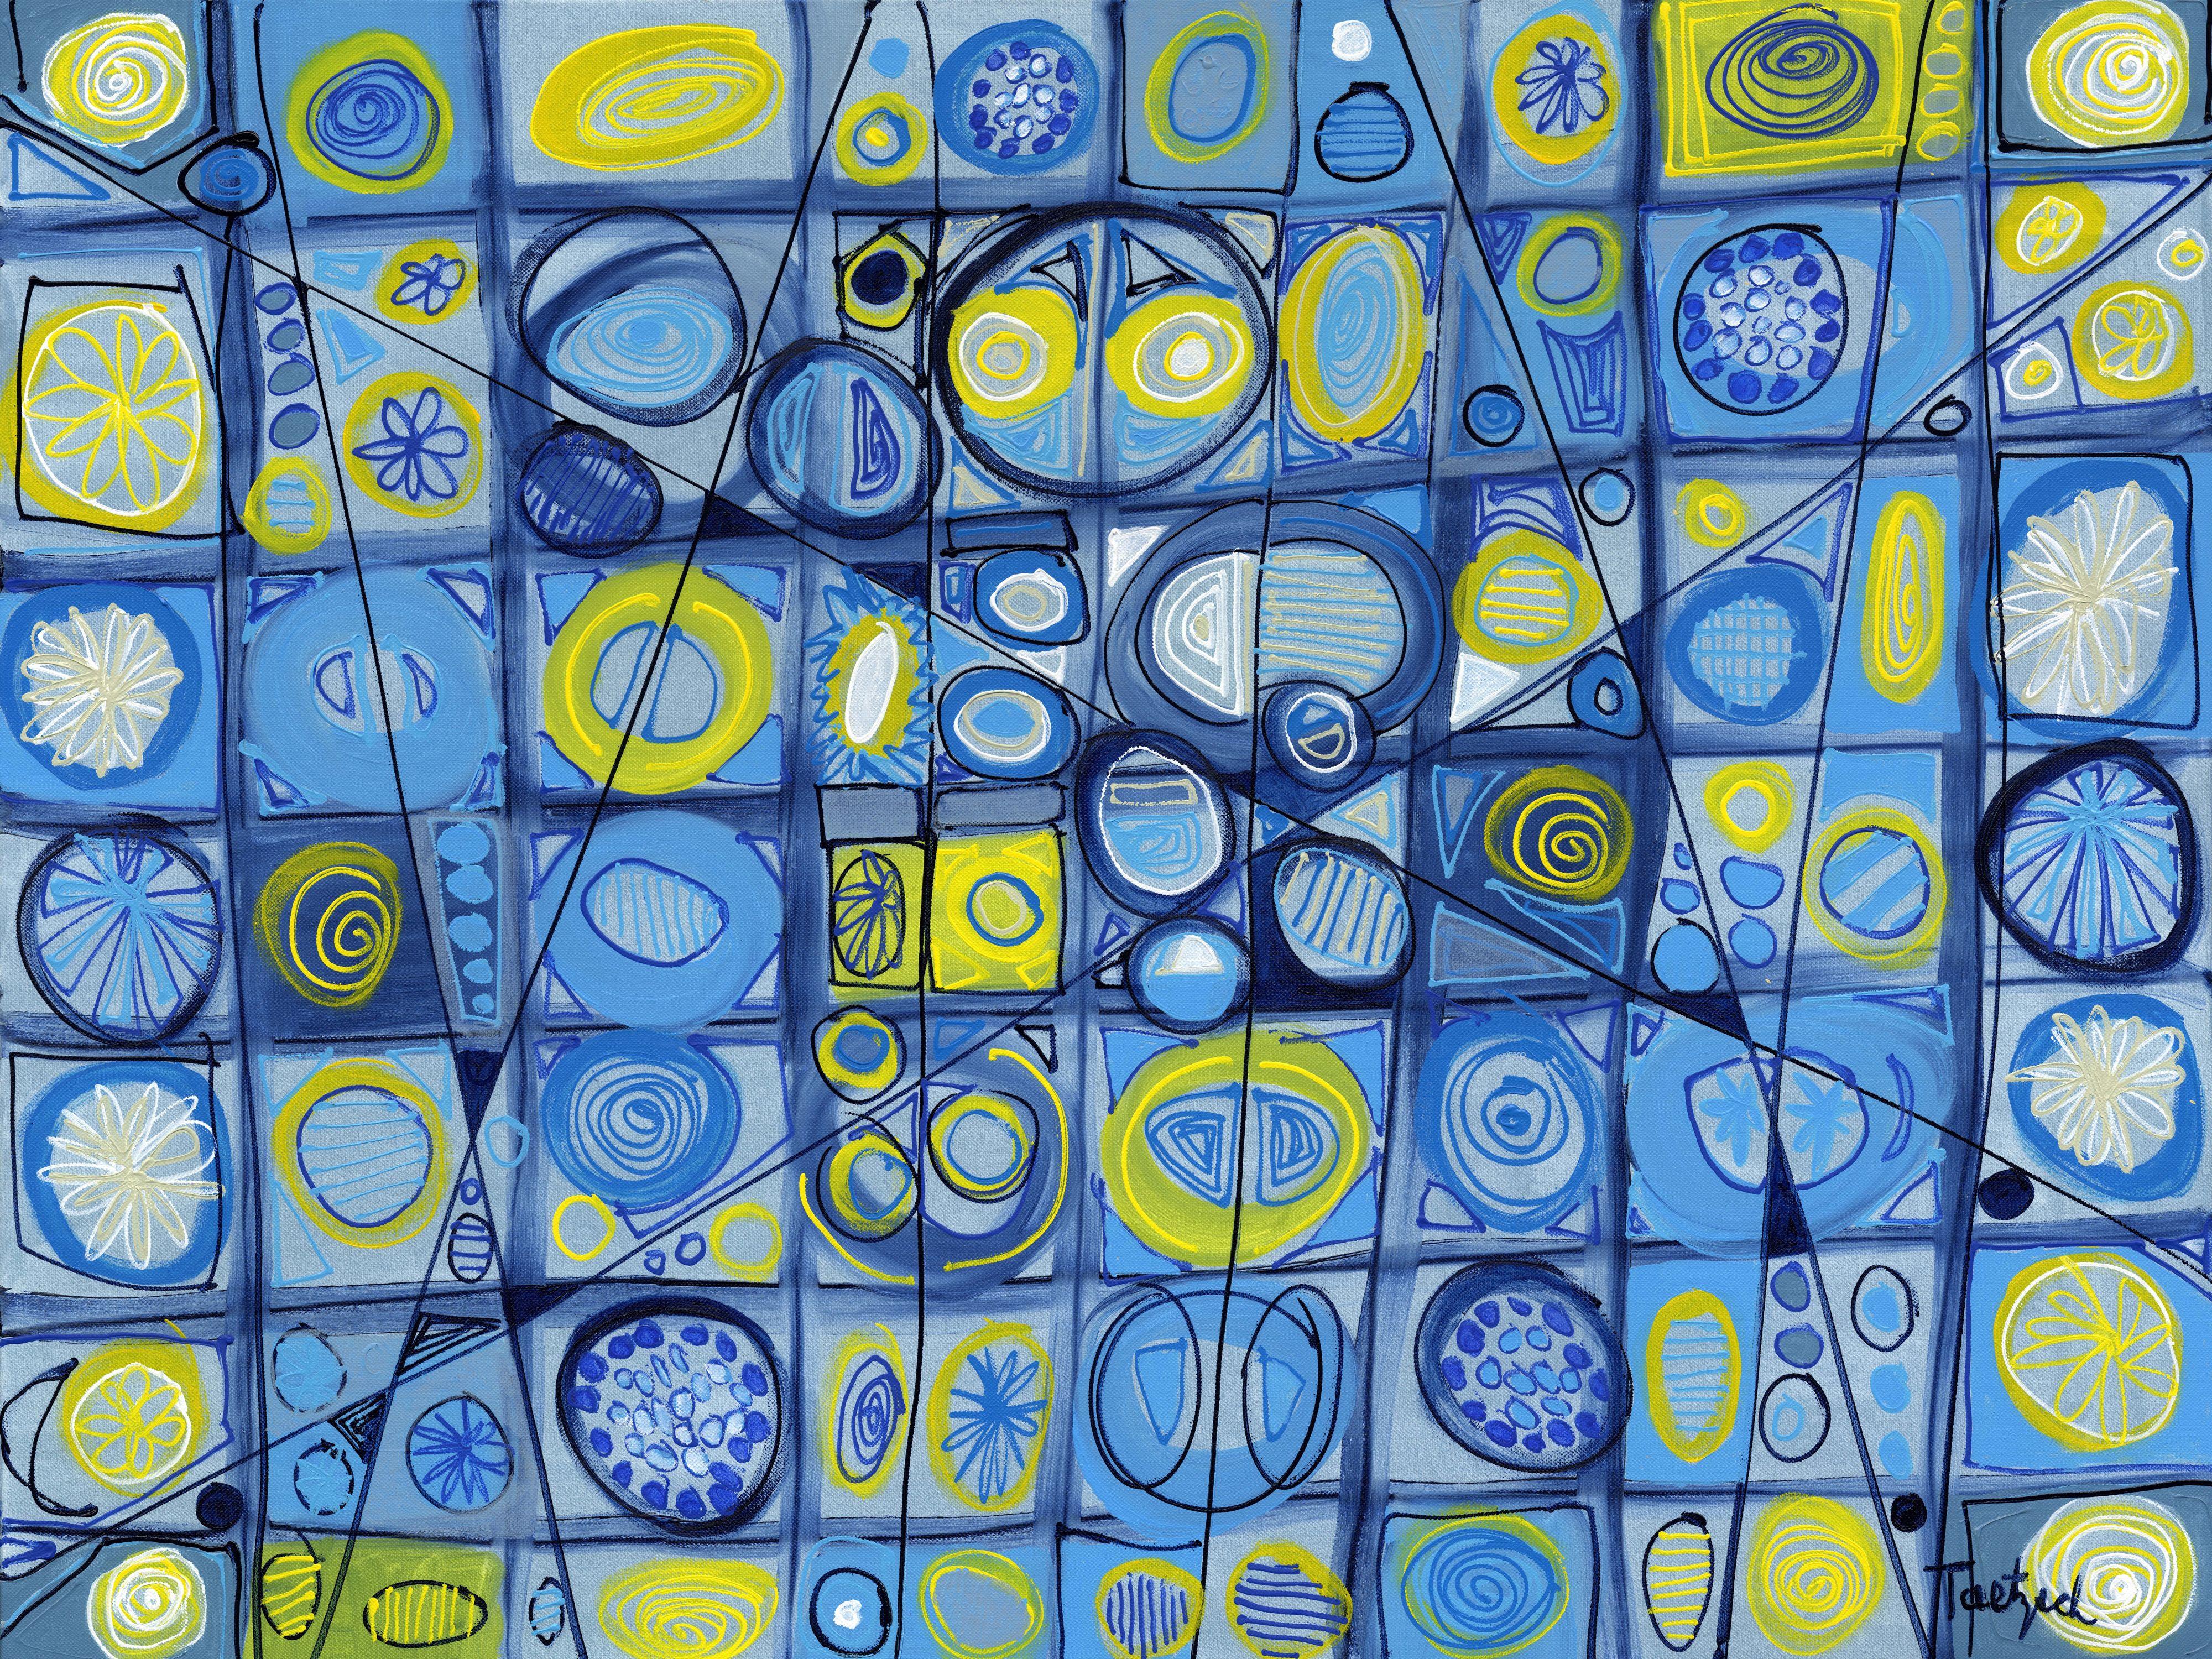 Abstract Art Sixty-Four is a playful painting of a grid filled with creative symbols and marks that might be interpreted according to your mood or time of day.  The painting is geometrical, yet free-form and spontaneous.    40" x 30" x 1.5" original